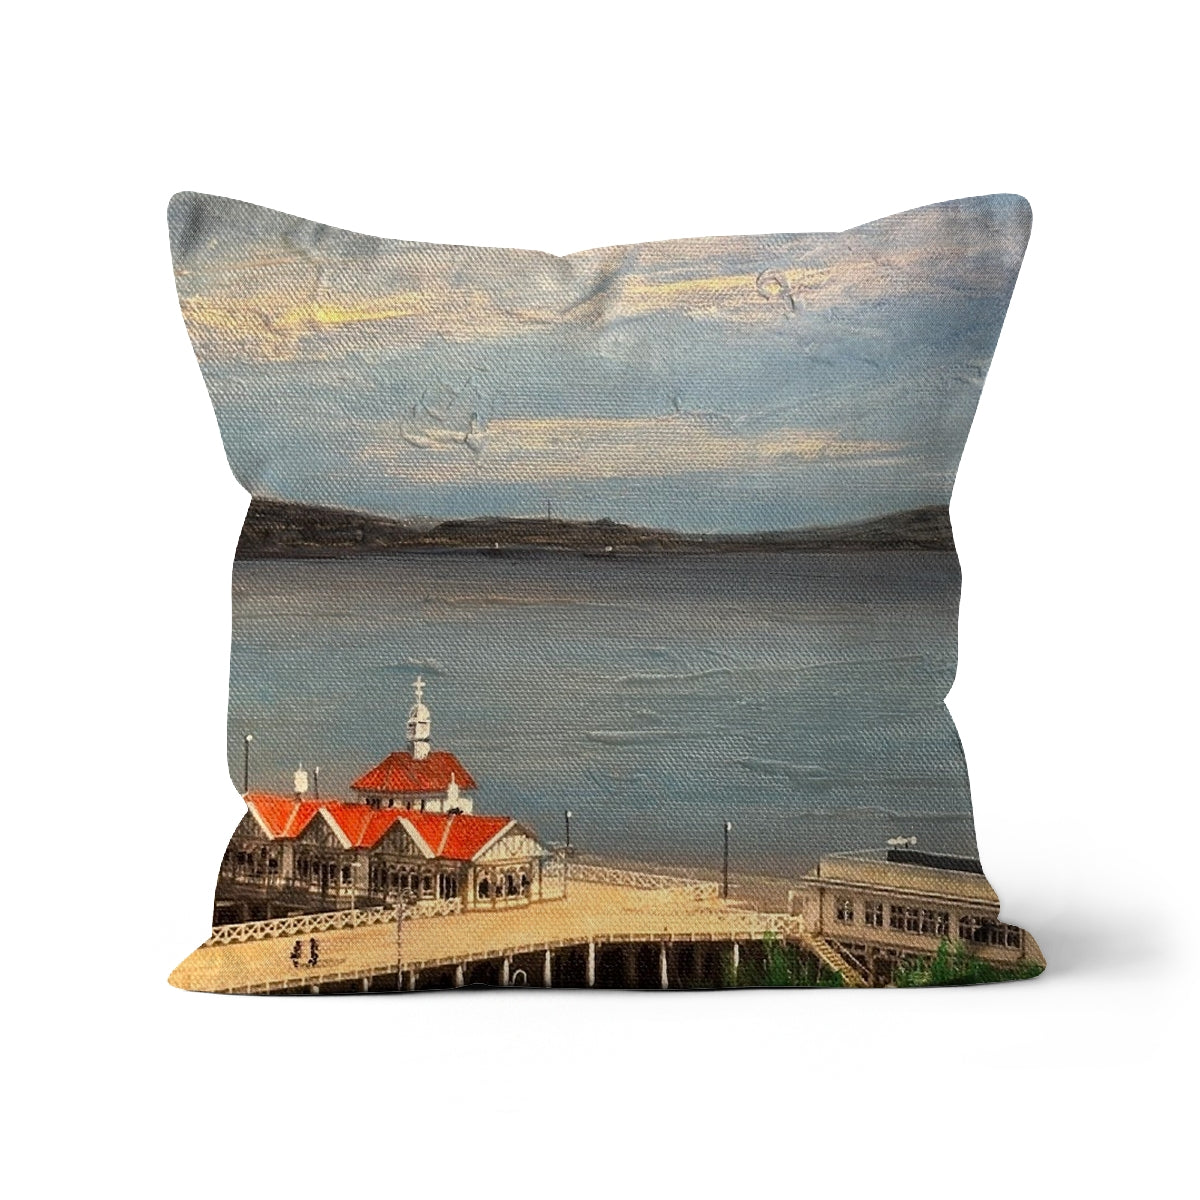 Looking From Dunoon Art Gifts Cushion-Cushions-River Clyde Art Gallery-Canvas-18"x18"-Paintings, Prints, Homeware, Art Gifts From Scotland By Scottish Artist Kevin Hunter